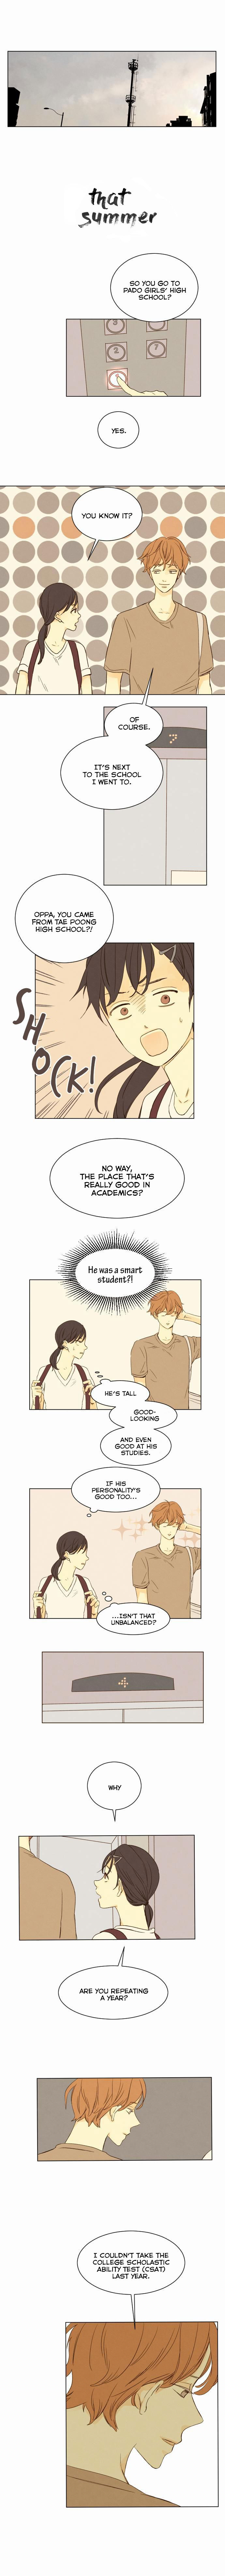 That Summer (KIM Hyun) Chapter 004 page 3